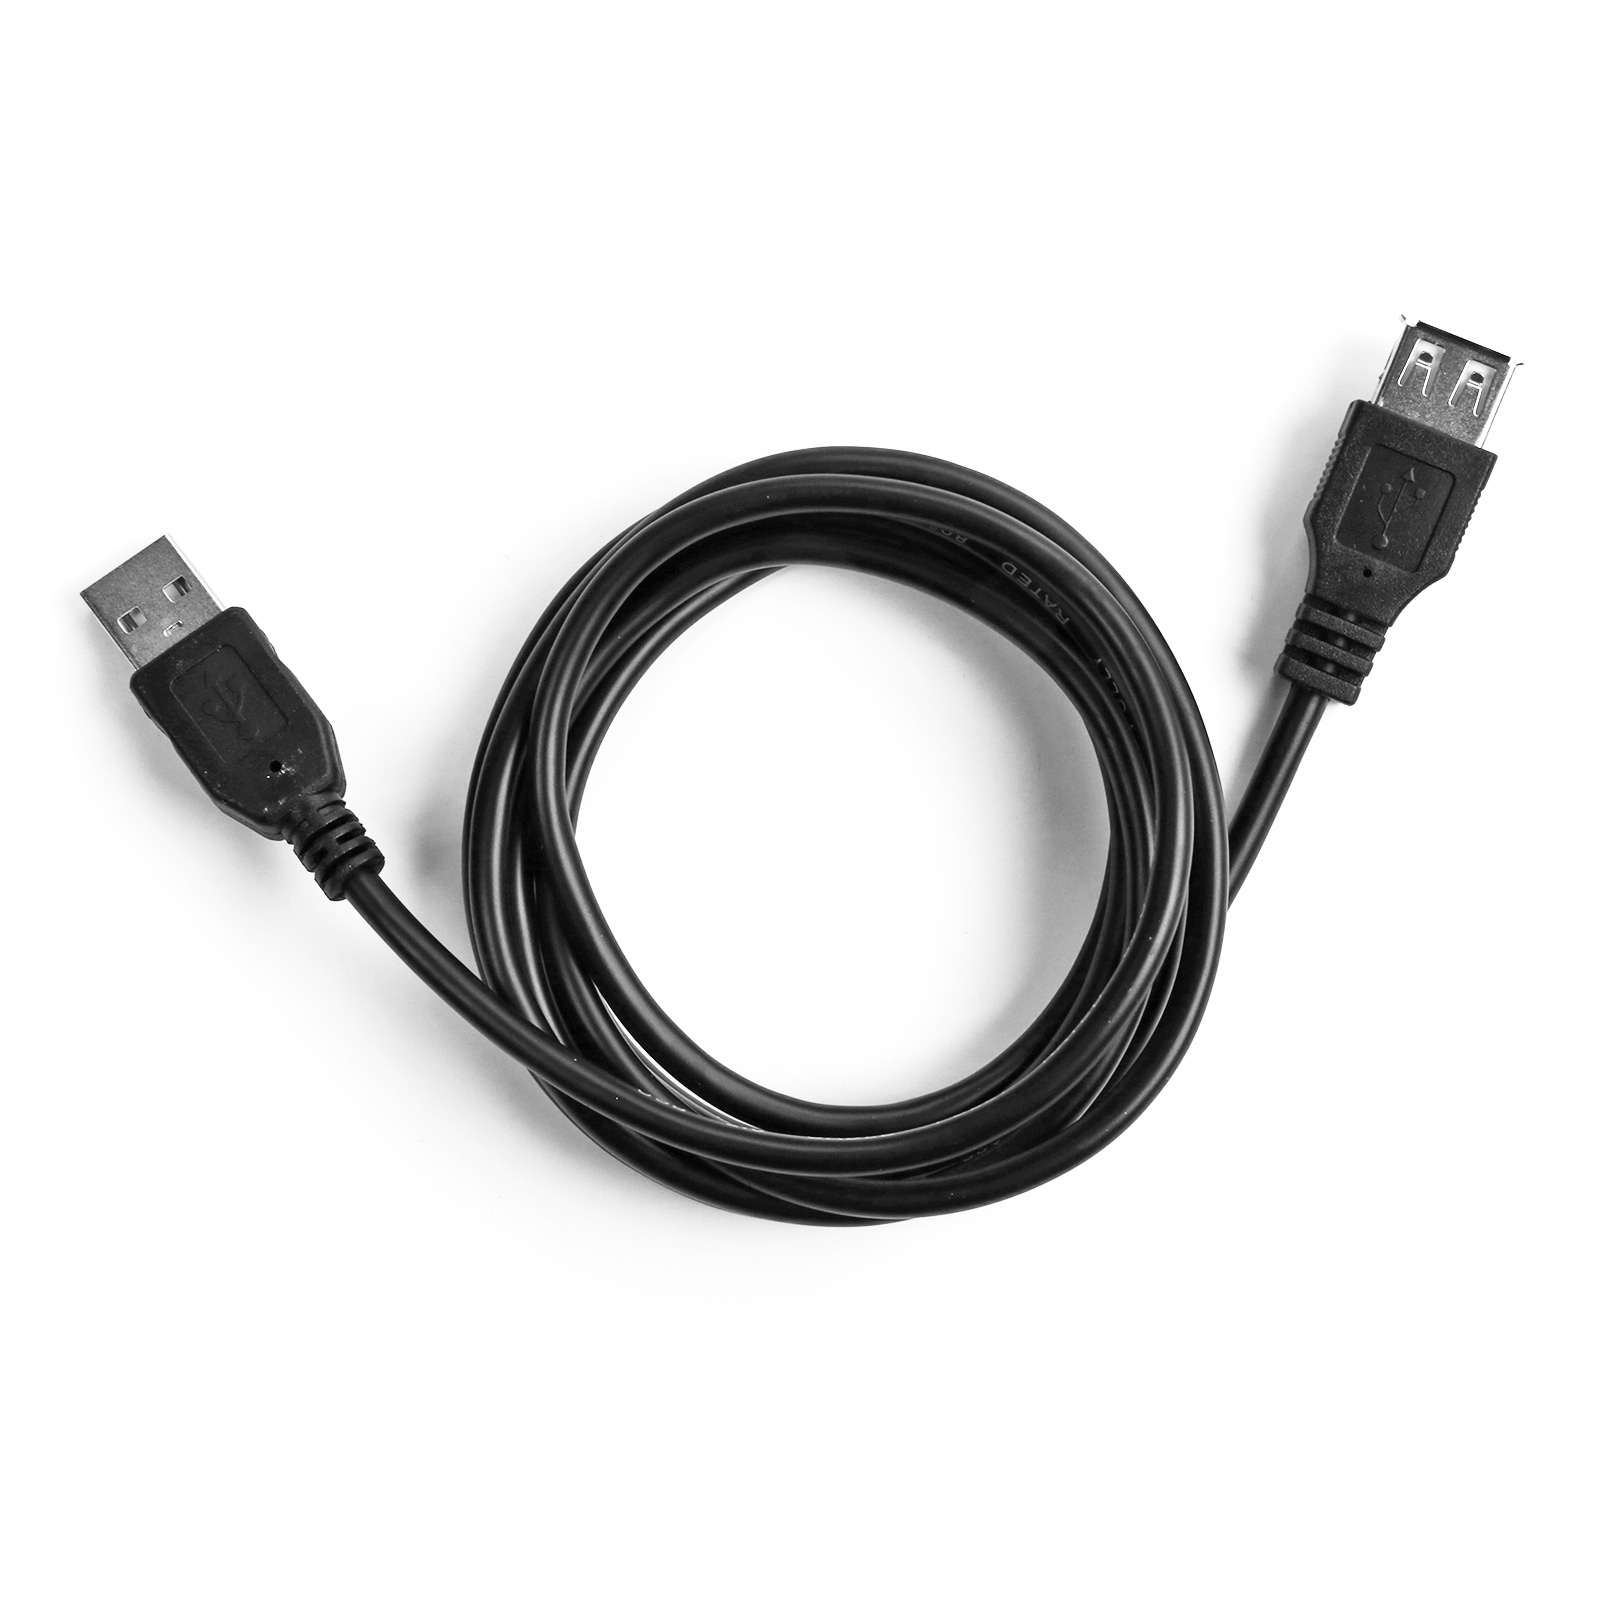 EKON USB cable 2.0 type A male to type B male length 1,8 m. nickel plated connector